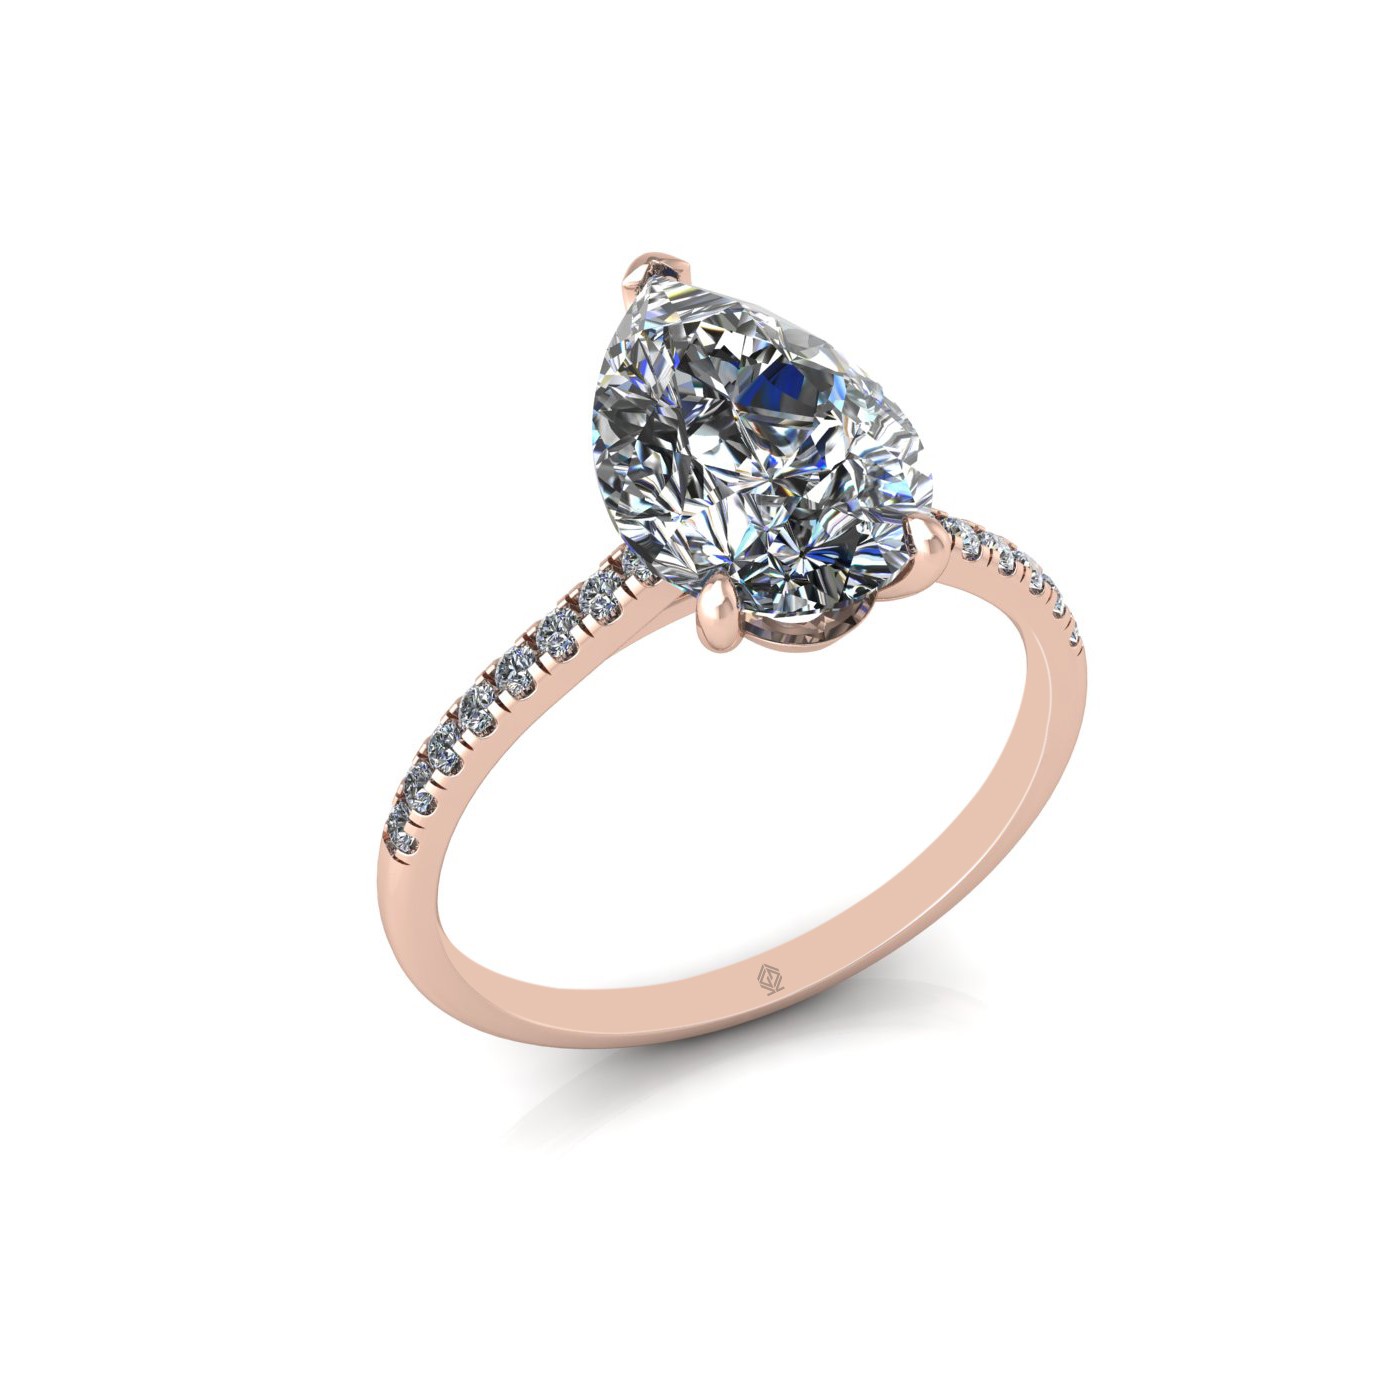 18k rose gold 2,50 ct 3 prongs pear diamond engagement ring with whisper thin pavÉ set band